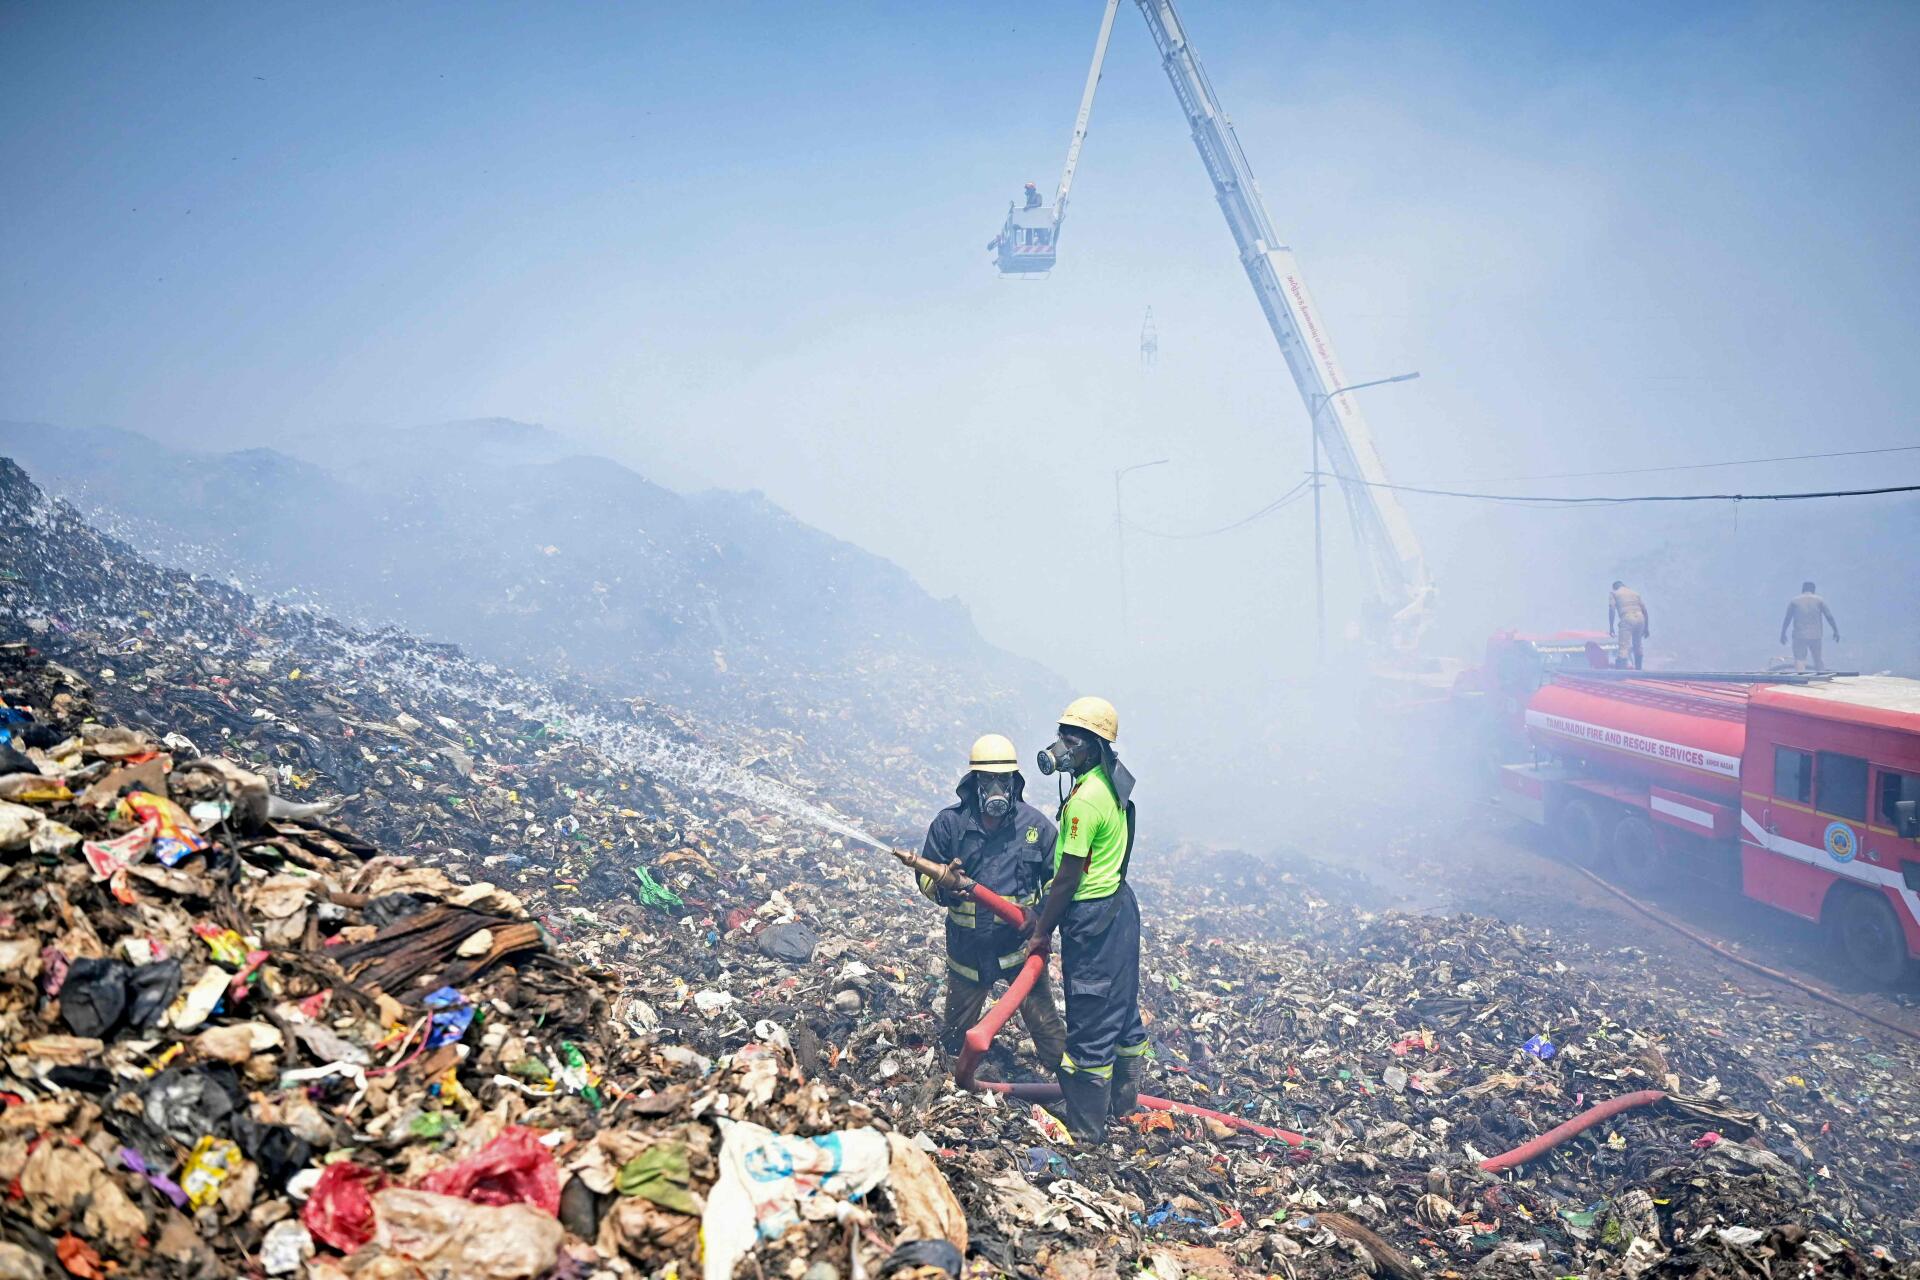 Firefighters try to put out burning waste after a fire broke out at Birungodi landfill in Chennai, Tamil Nadu state on April 29, 2022.